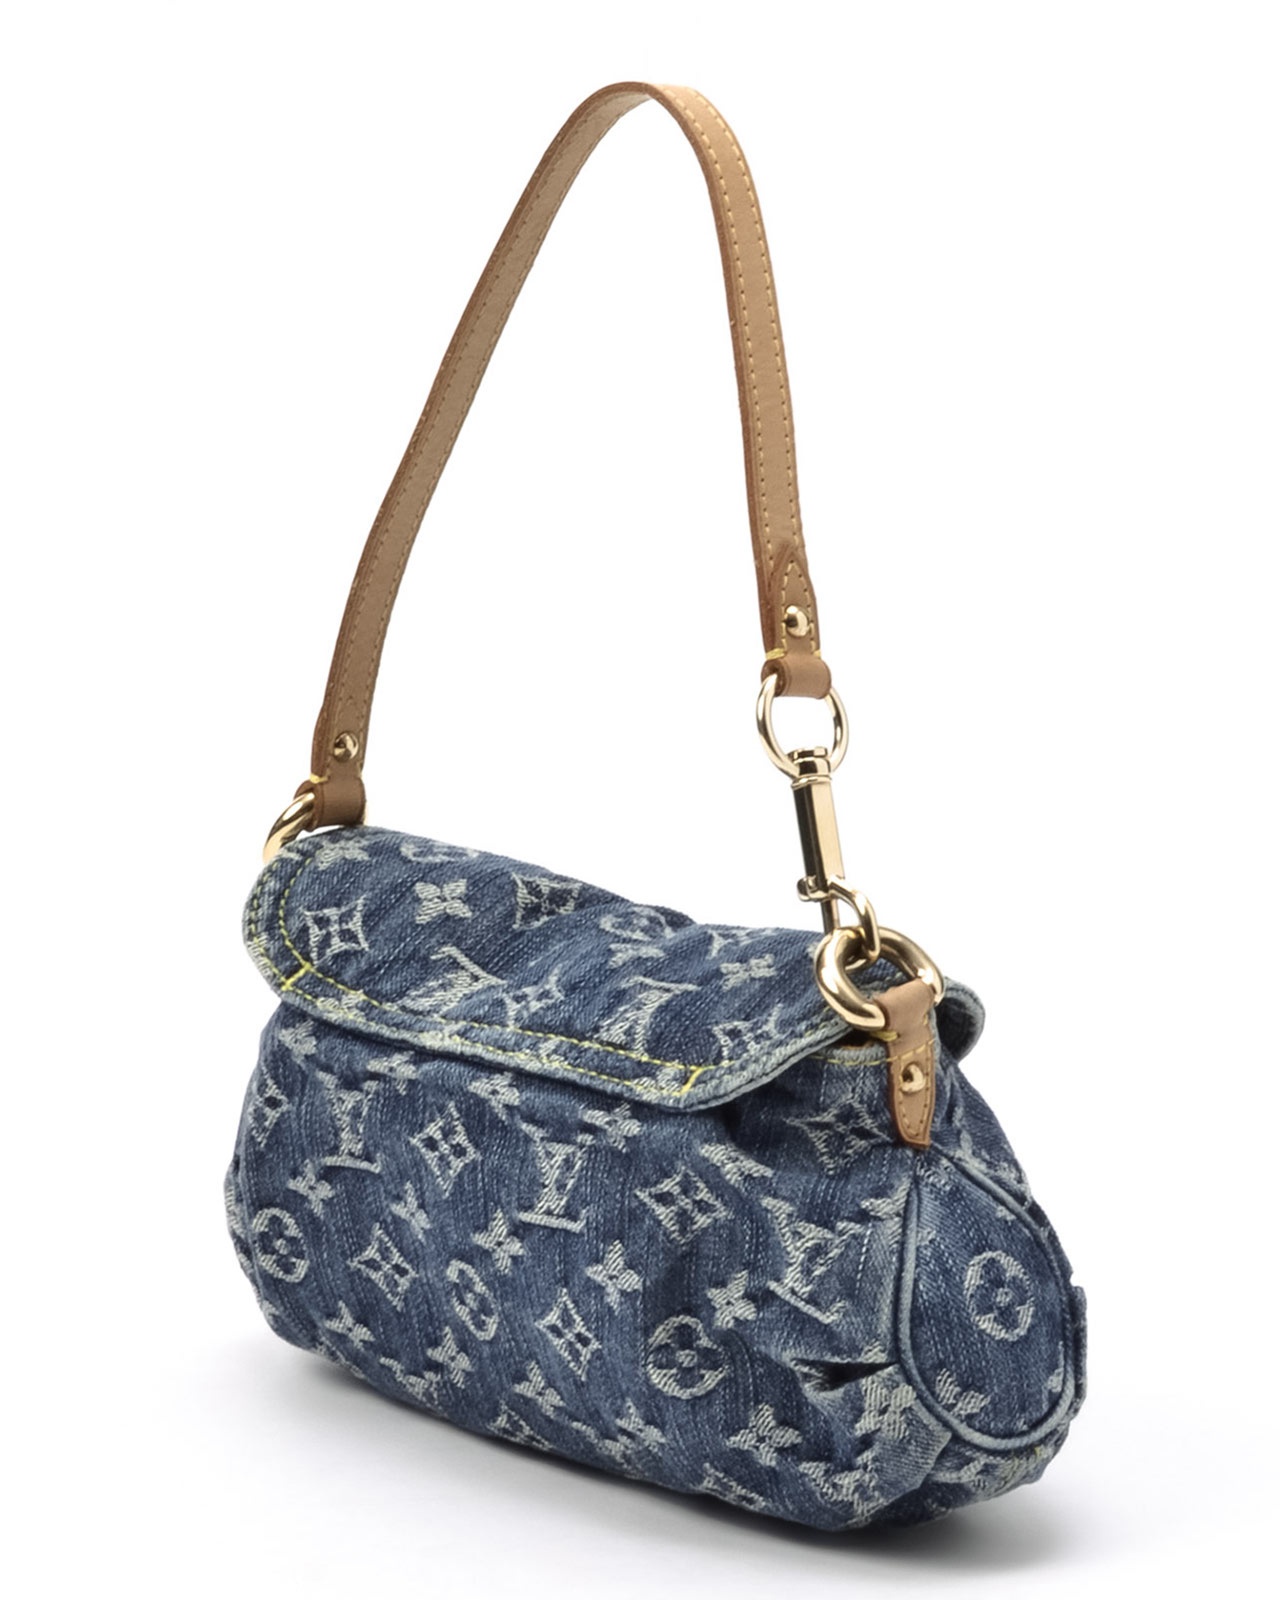 Blue Louis Vuitton Bags For Women The Art Of Mike Mignola